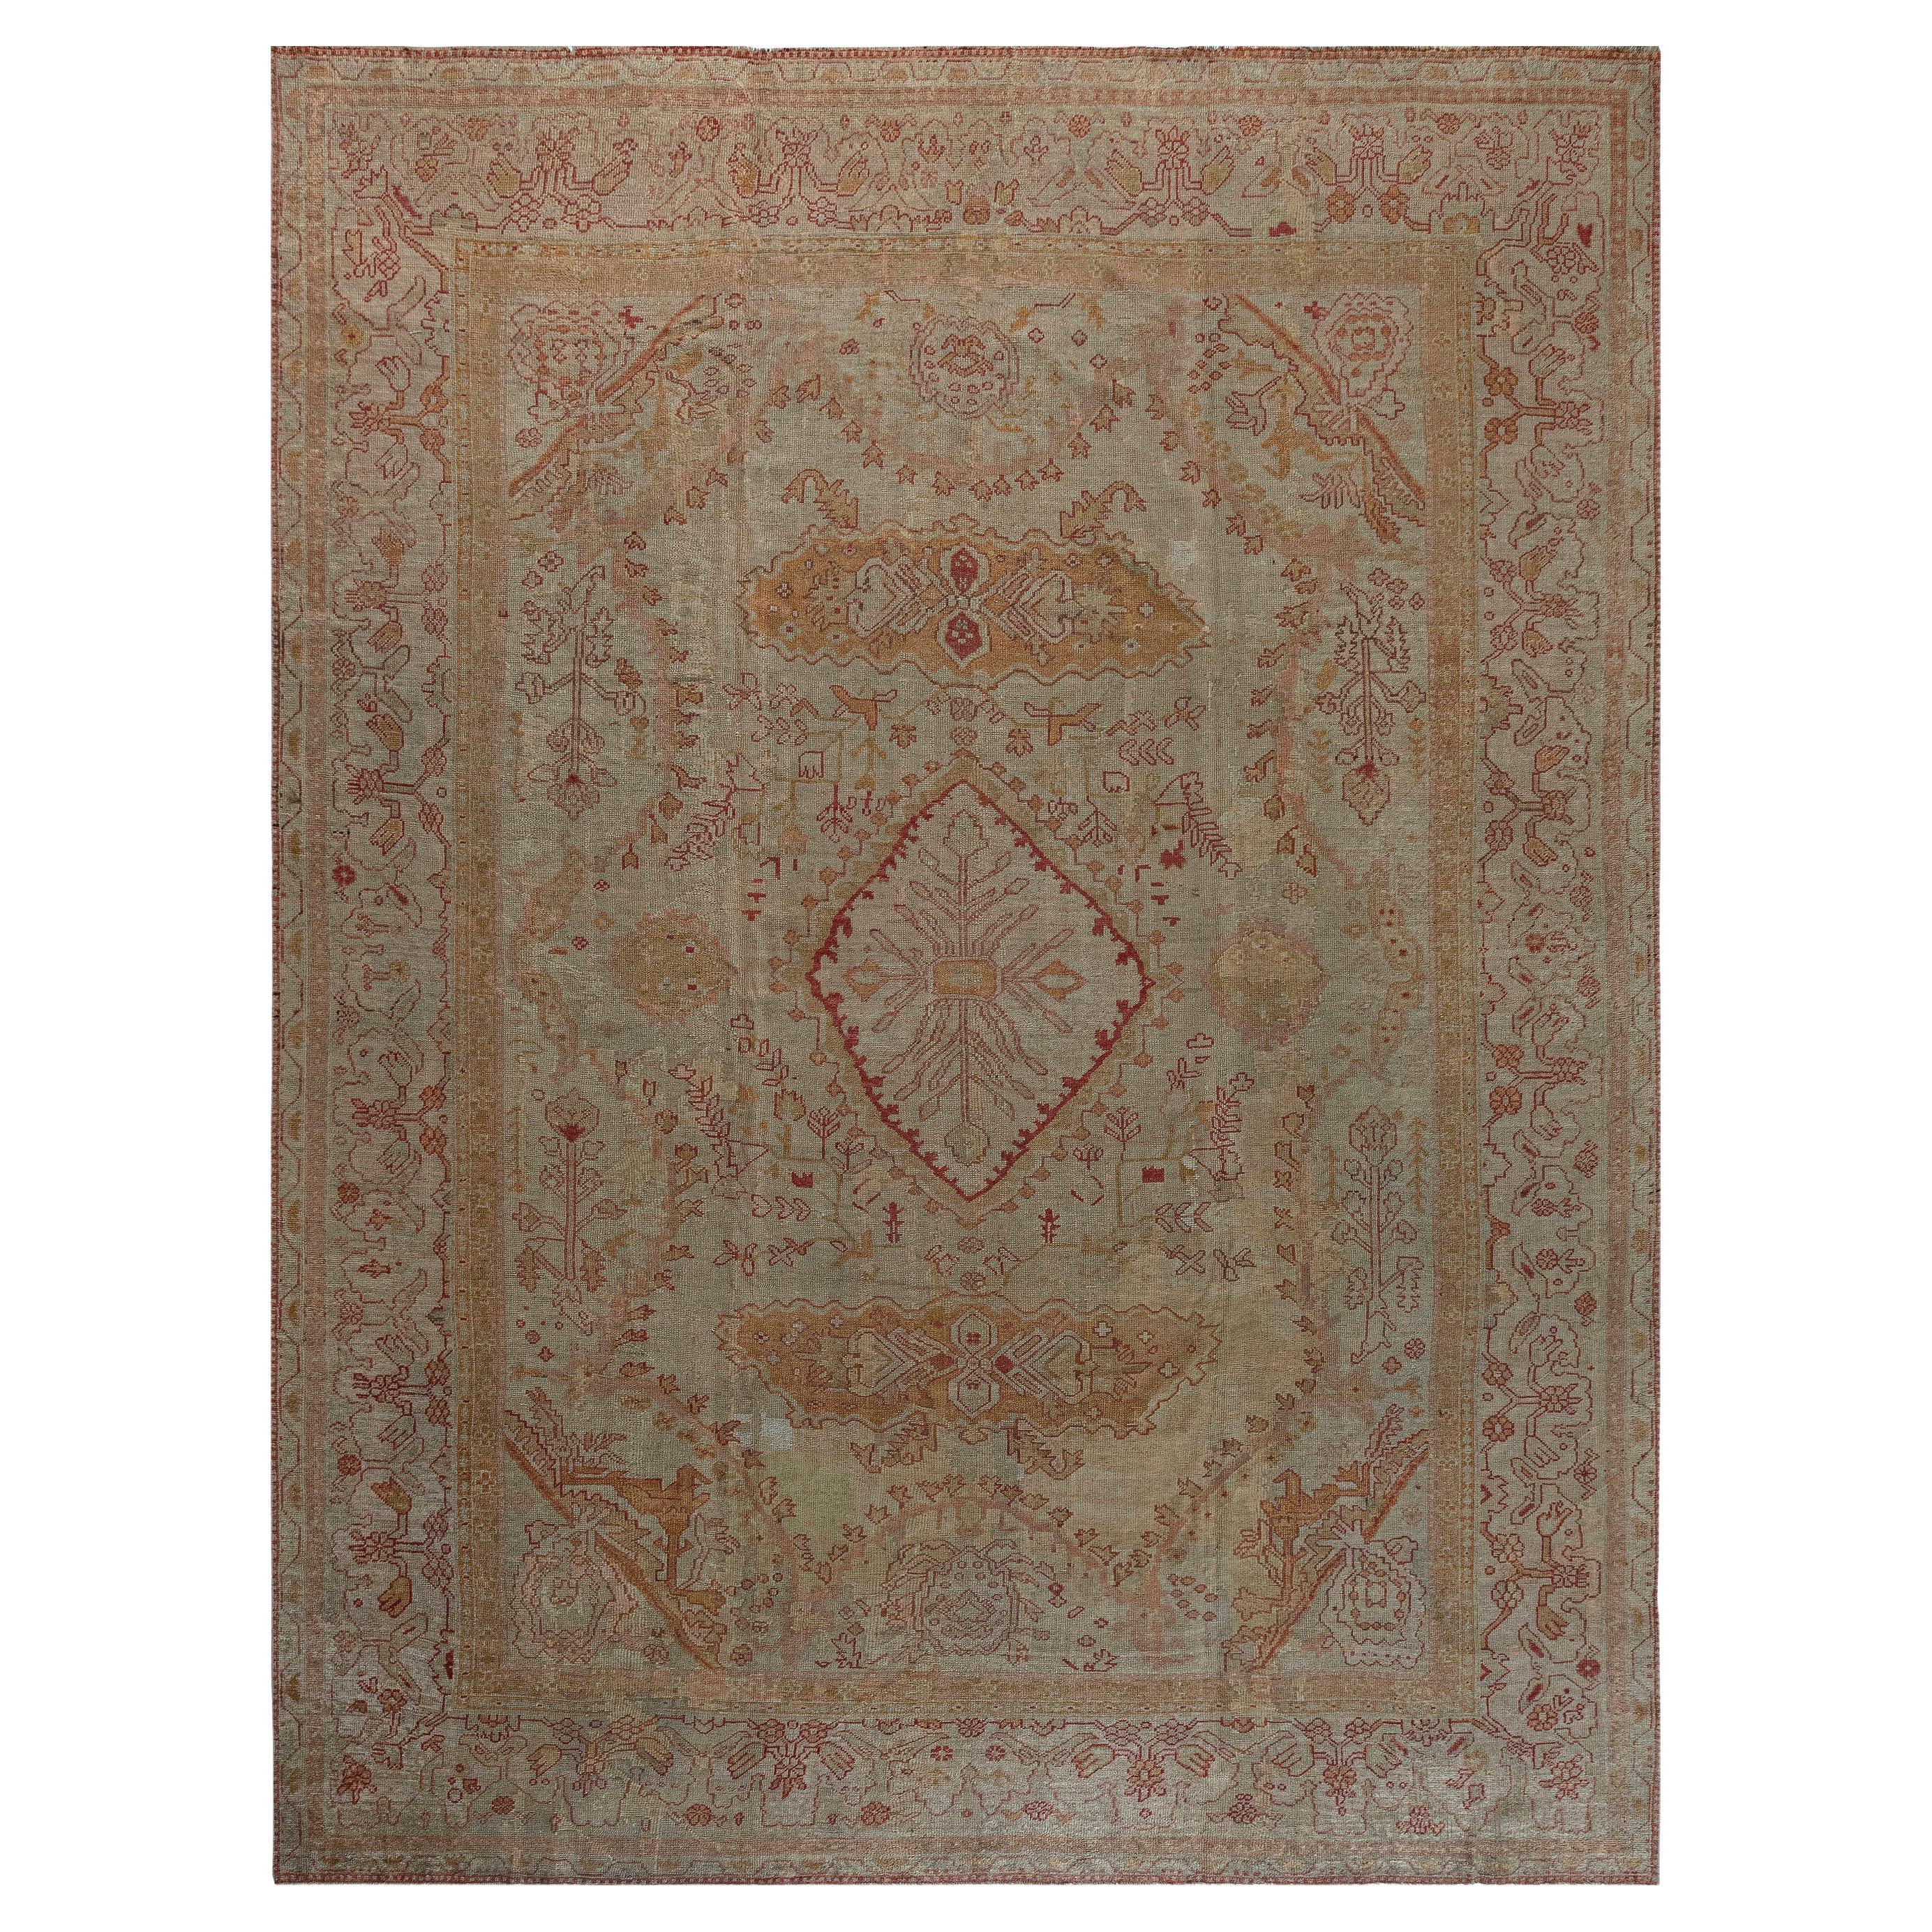 Authentic 19th Century Turkish Oushak Rug For Sale